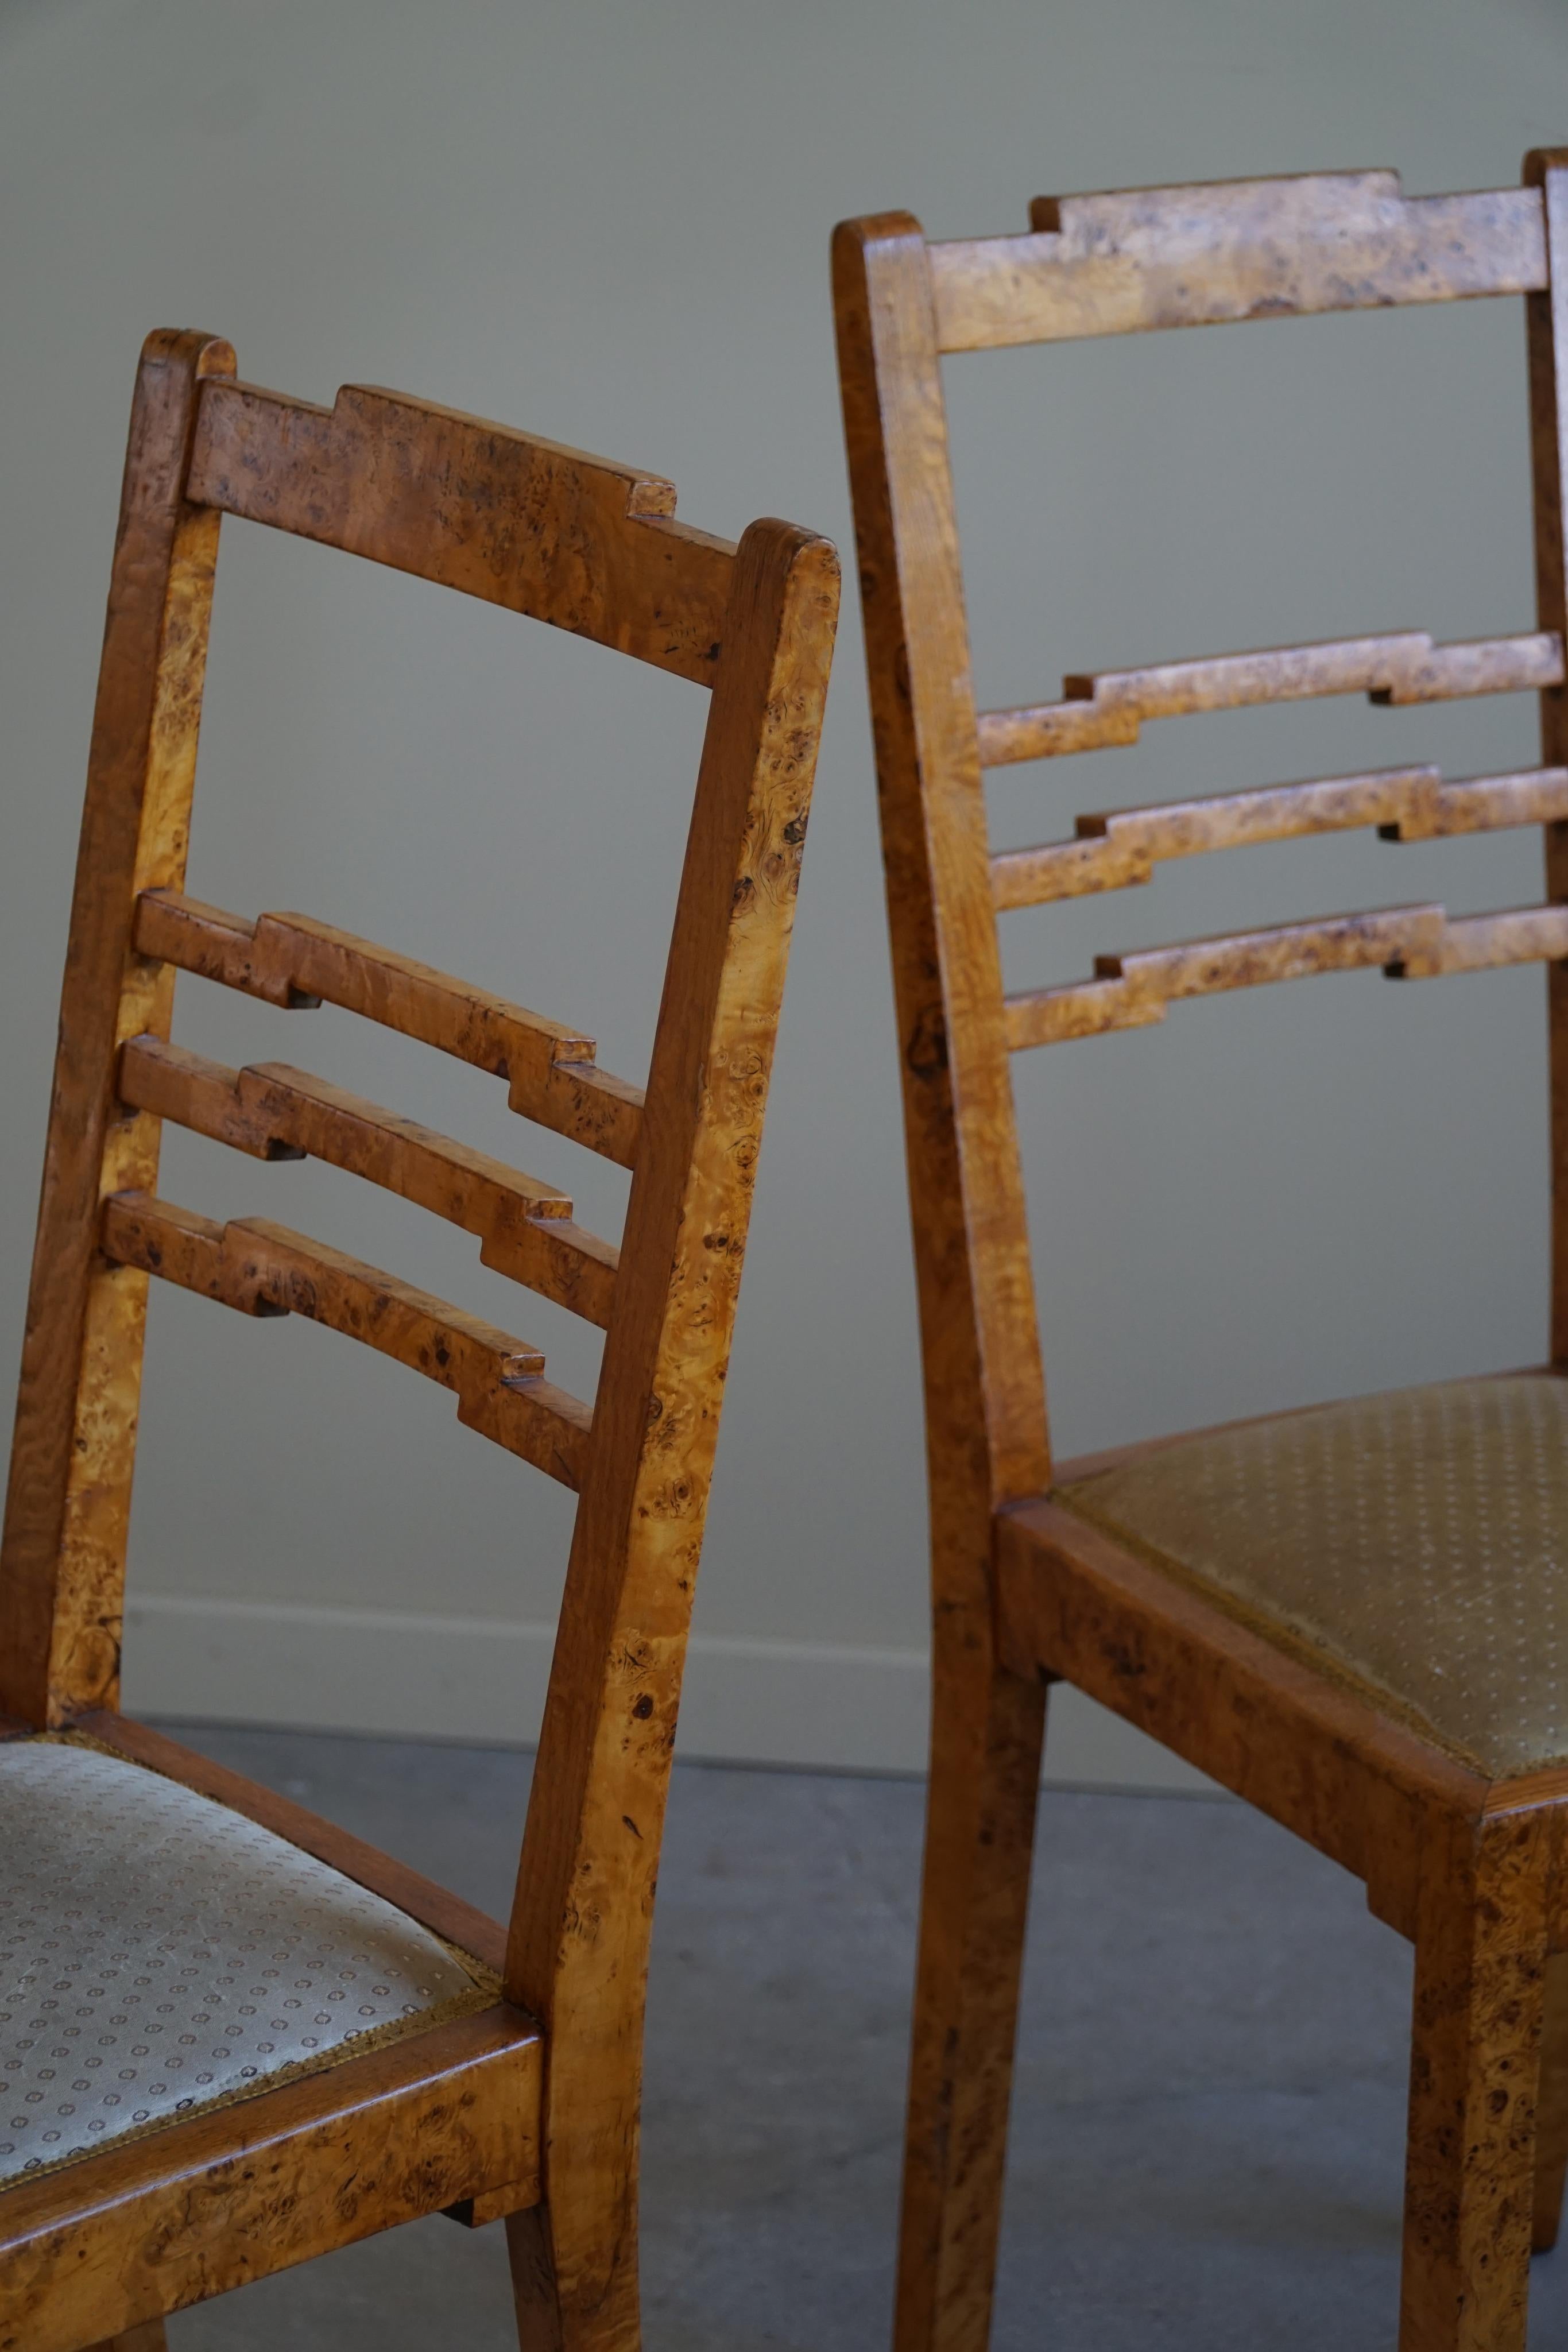 A Pair of Swedish Art Deco Dining Room Chairs in Birch, 1920s For Sale 12